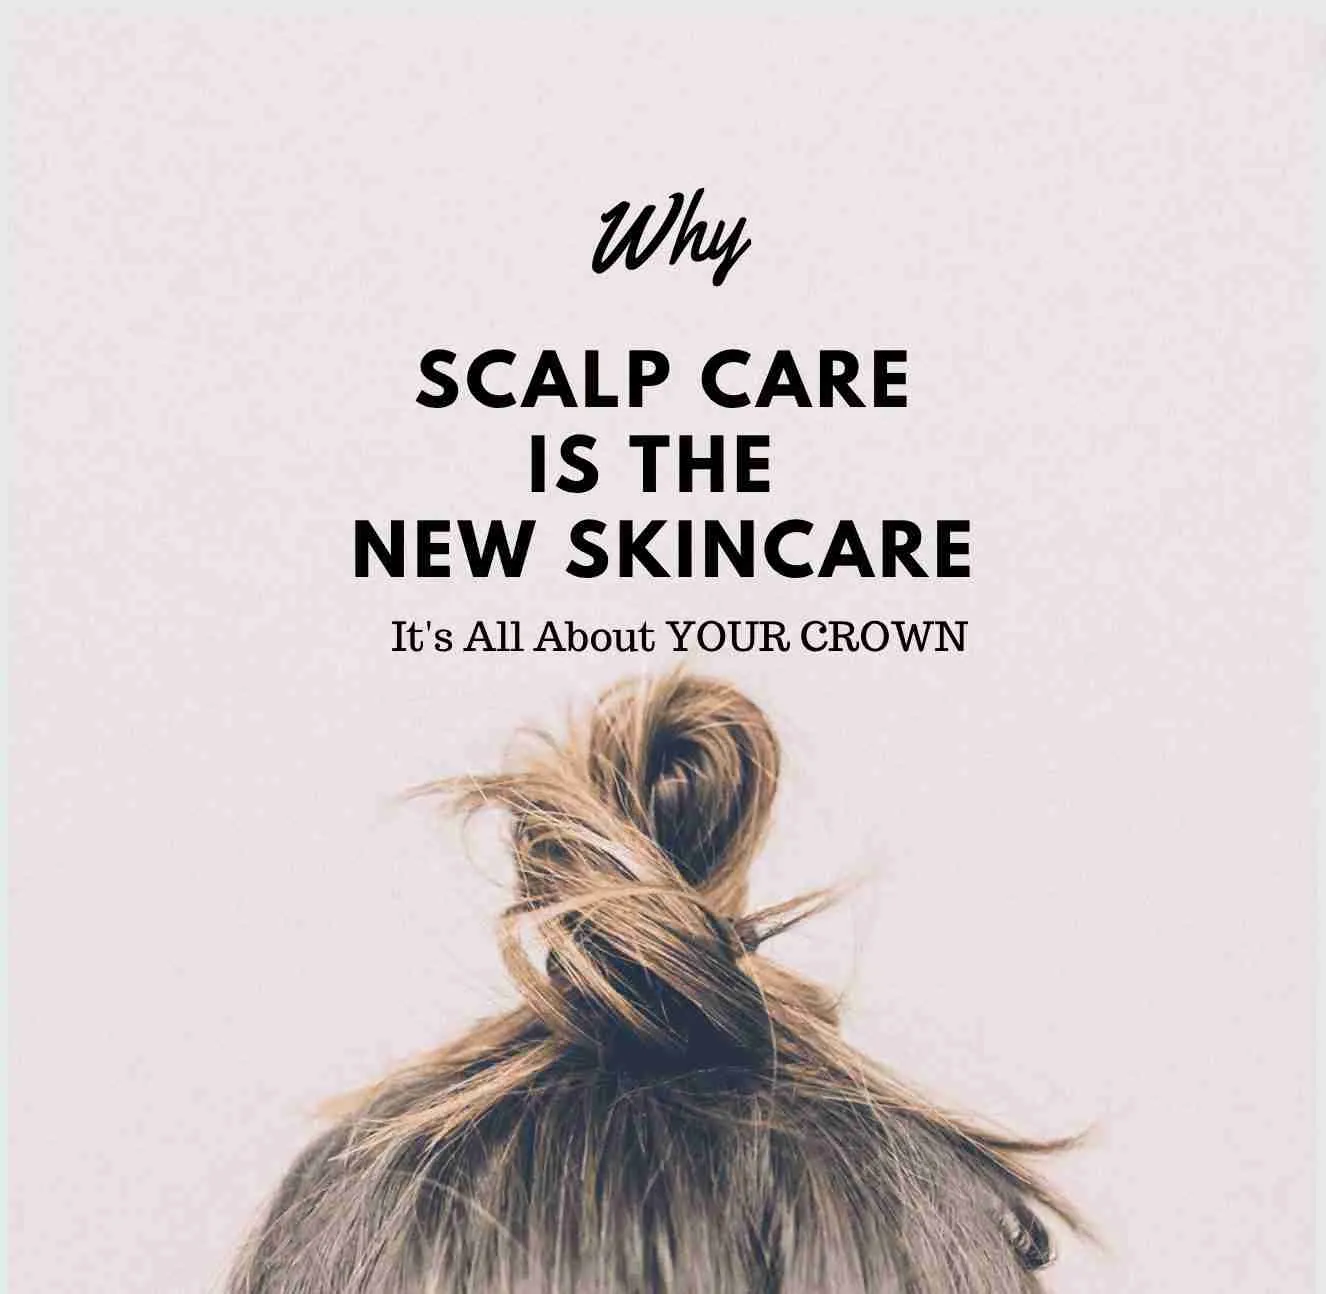 Scalp Care as the new trend